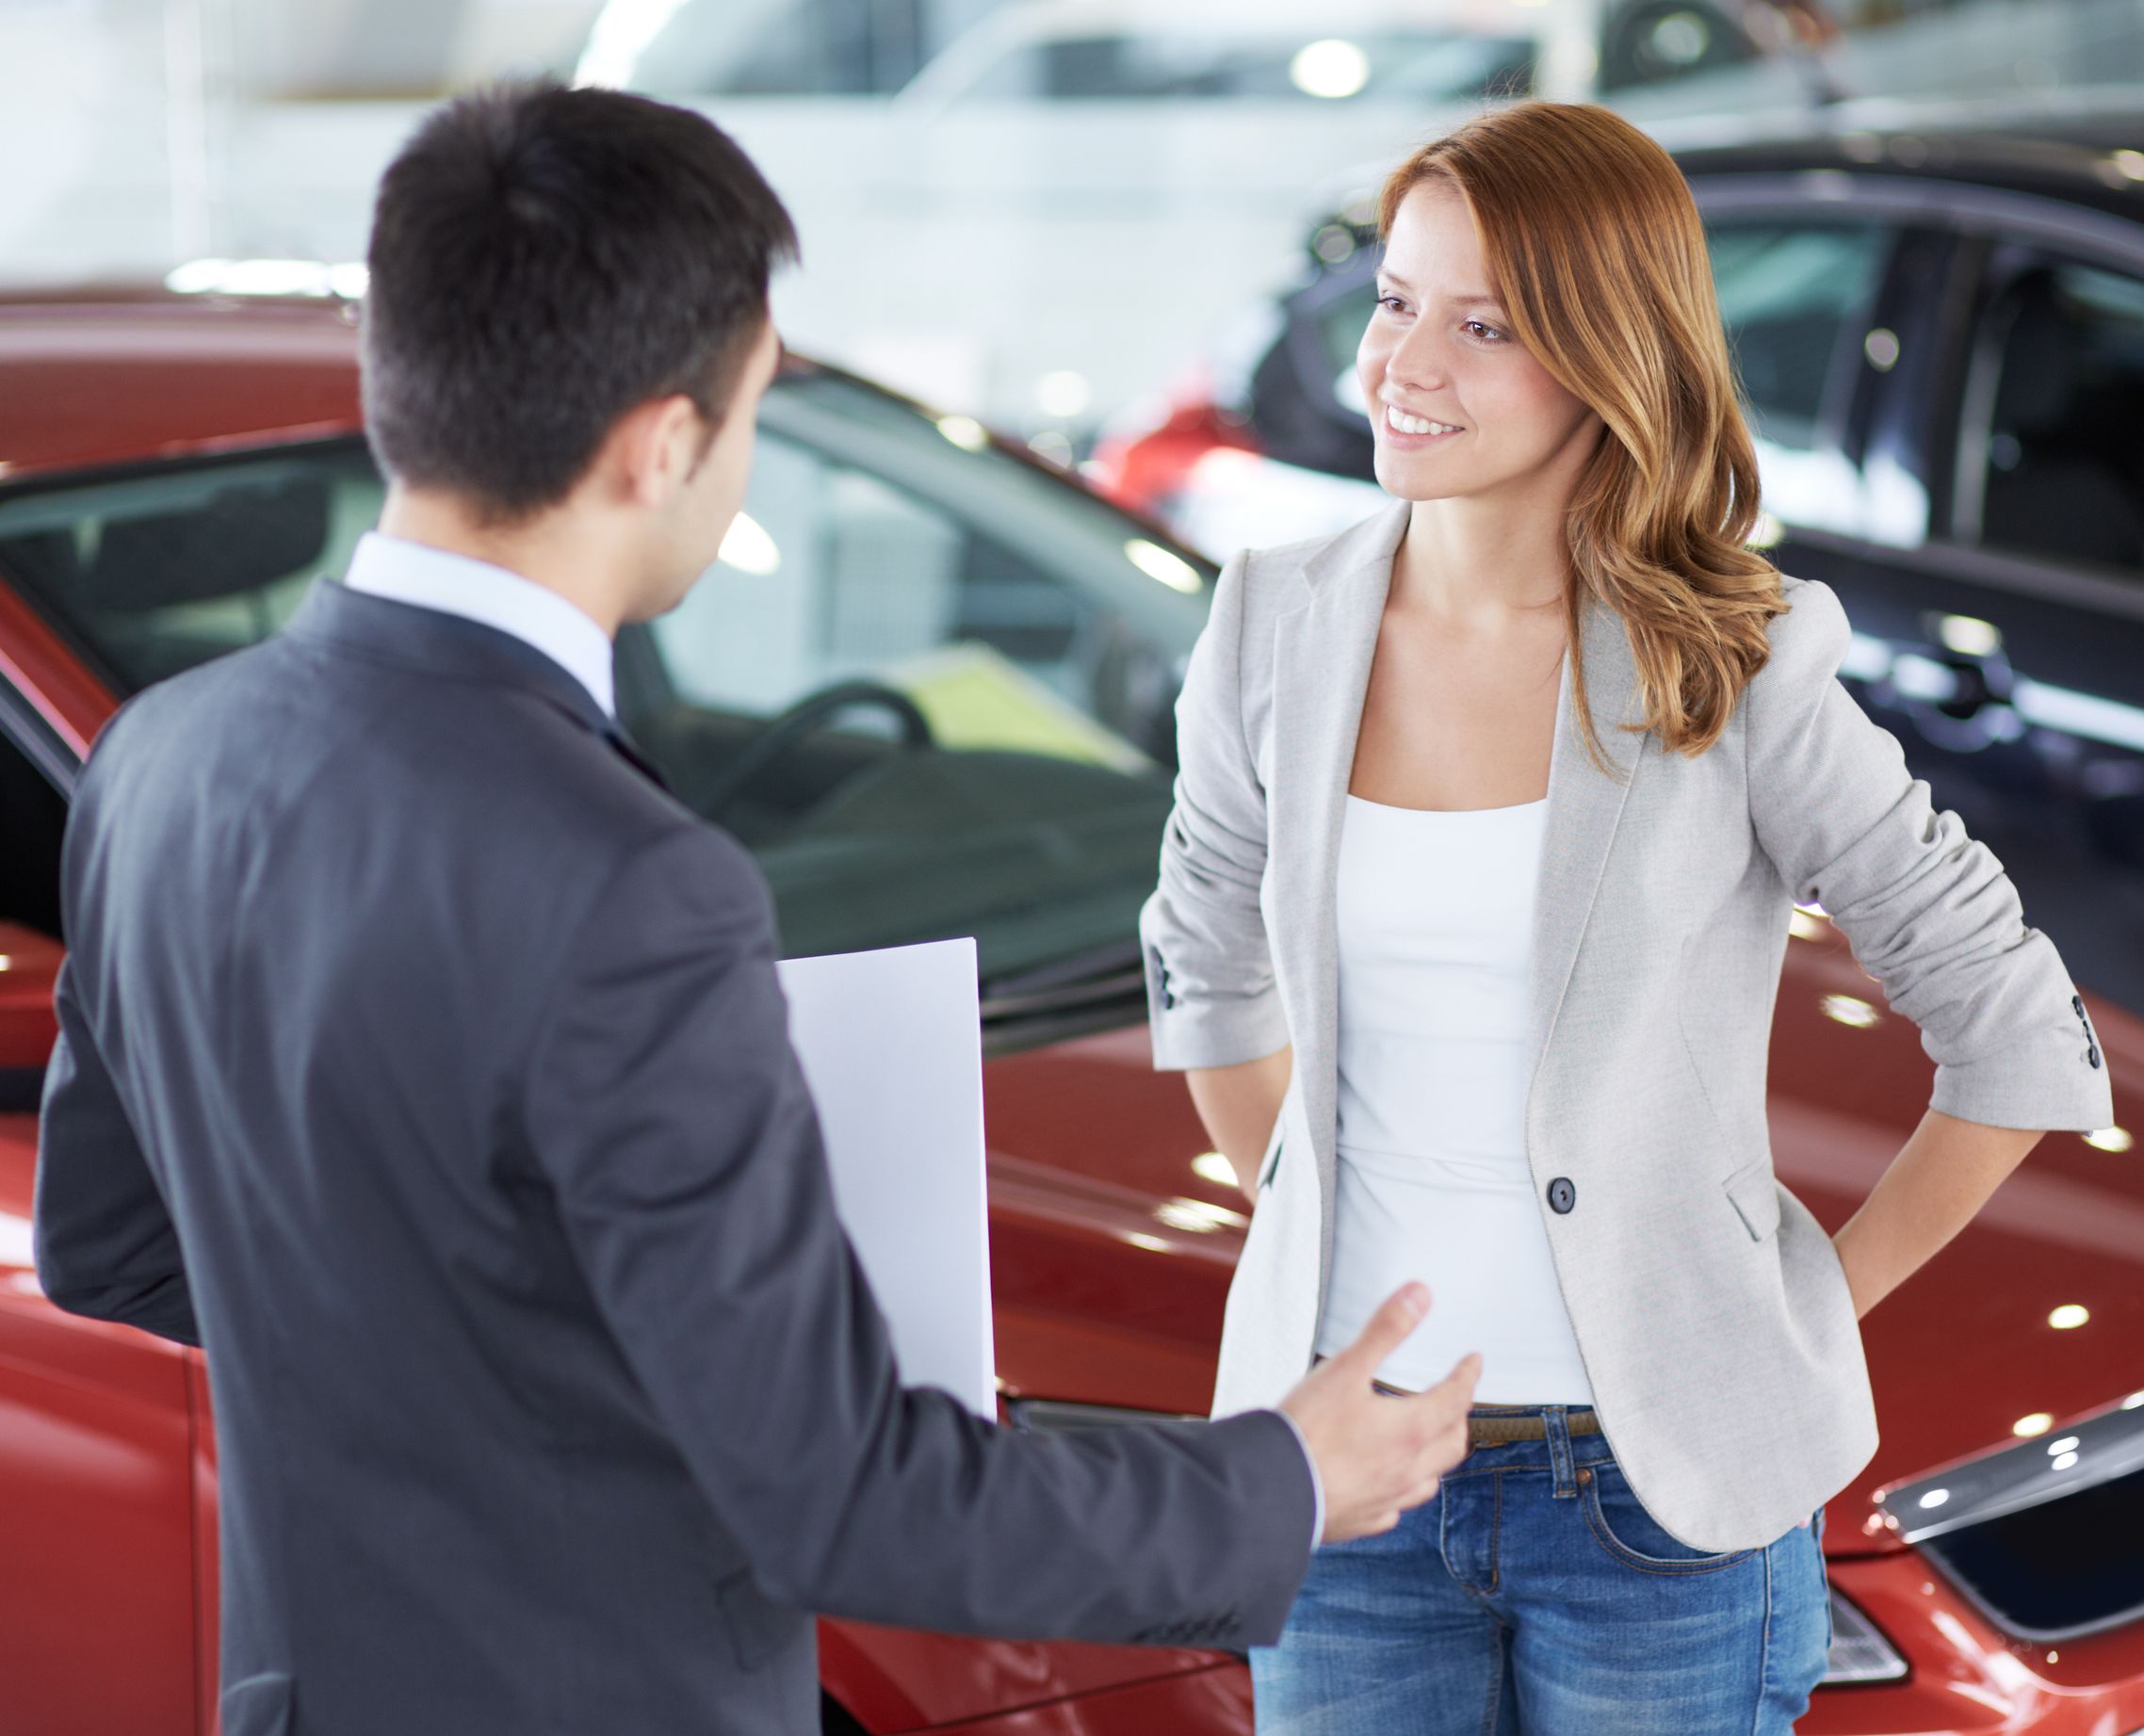 Upgrade Your Options By Considering Used Cars For Sale